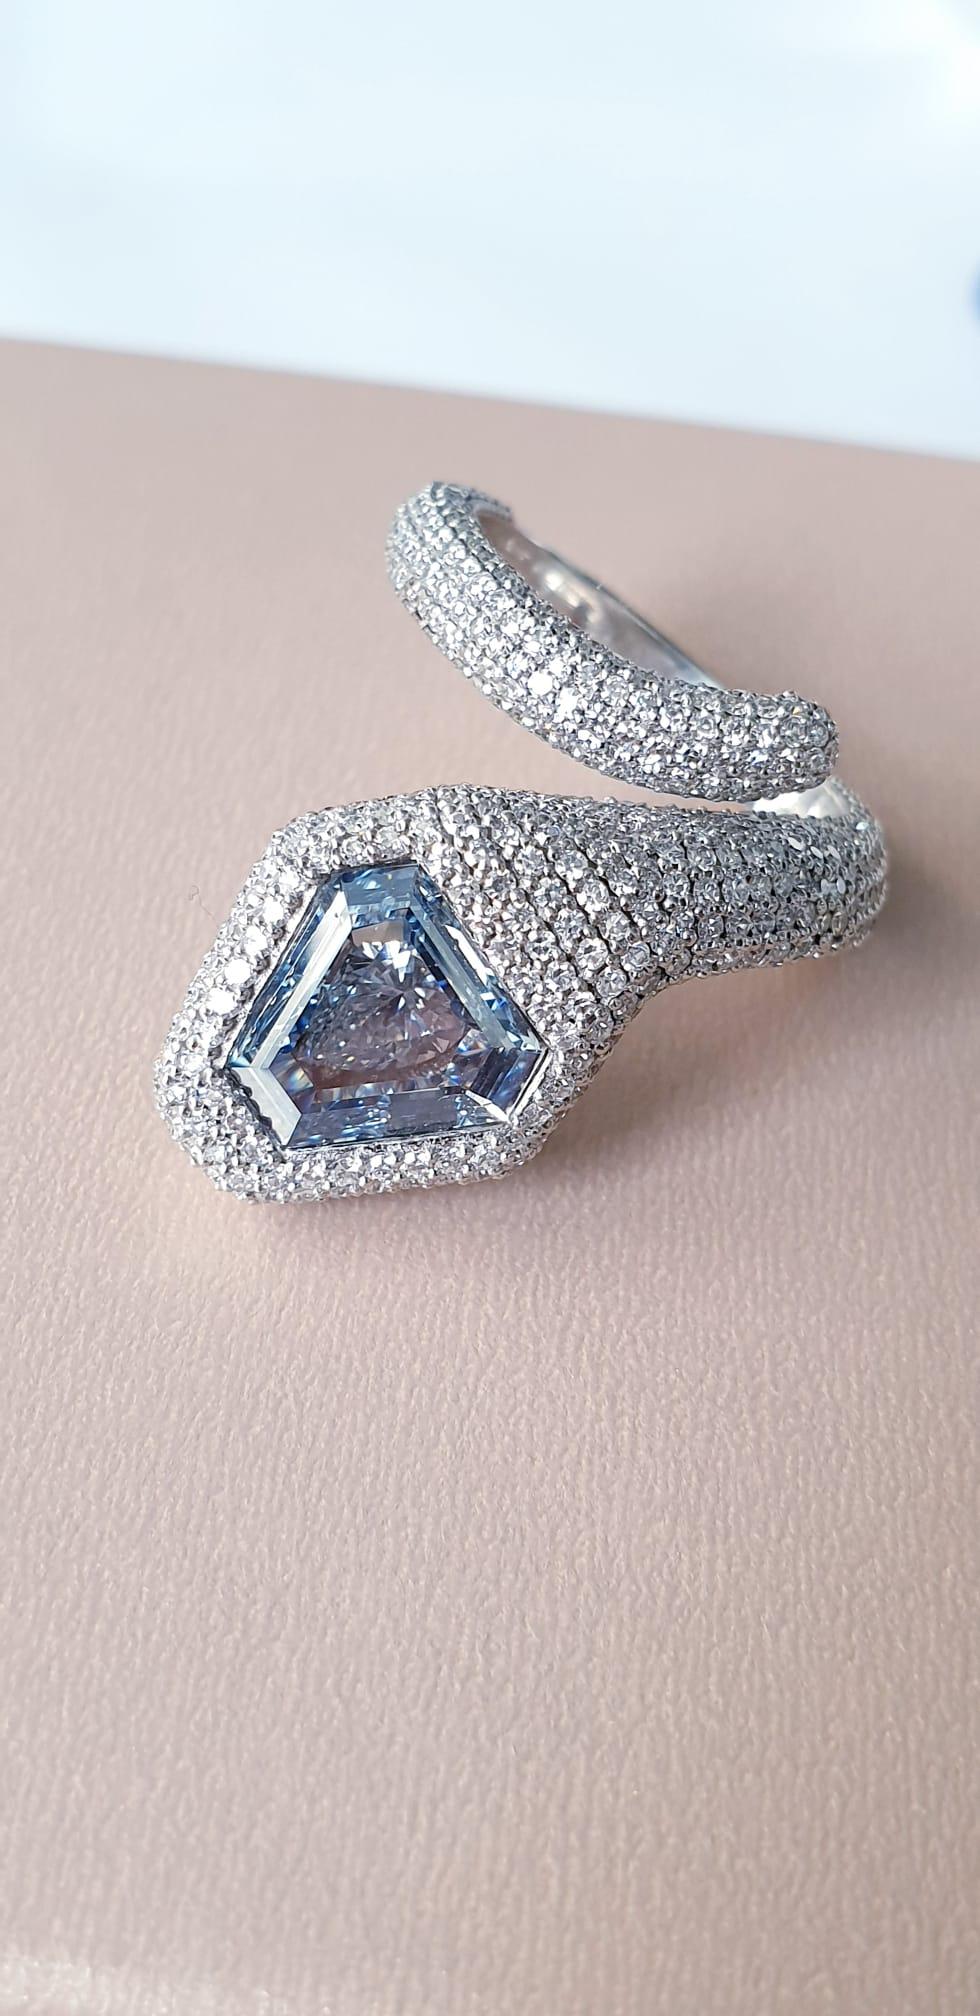 From The Museum Vault At Emilio Jewelry New York,

Main stone: Gia certified natural Fancy intense pure blue diamond Shield cut with no overtone set in the center just over 1.25 carats. Uniquely enough we set a large white pear shape just under the